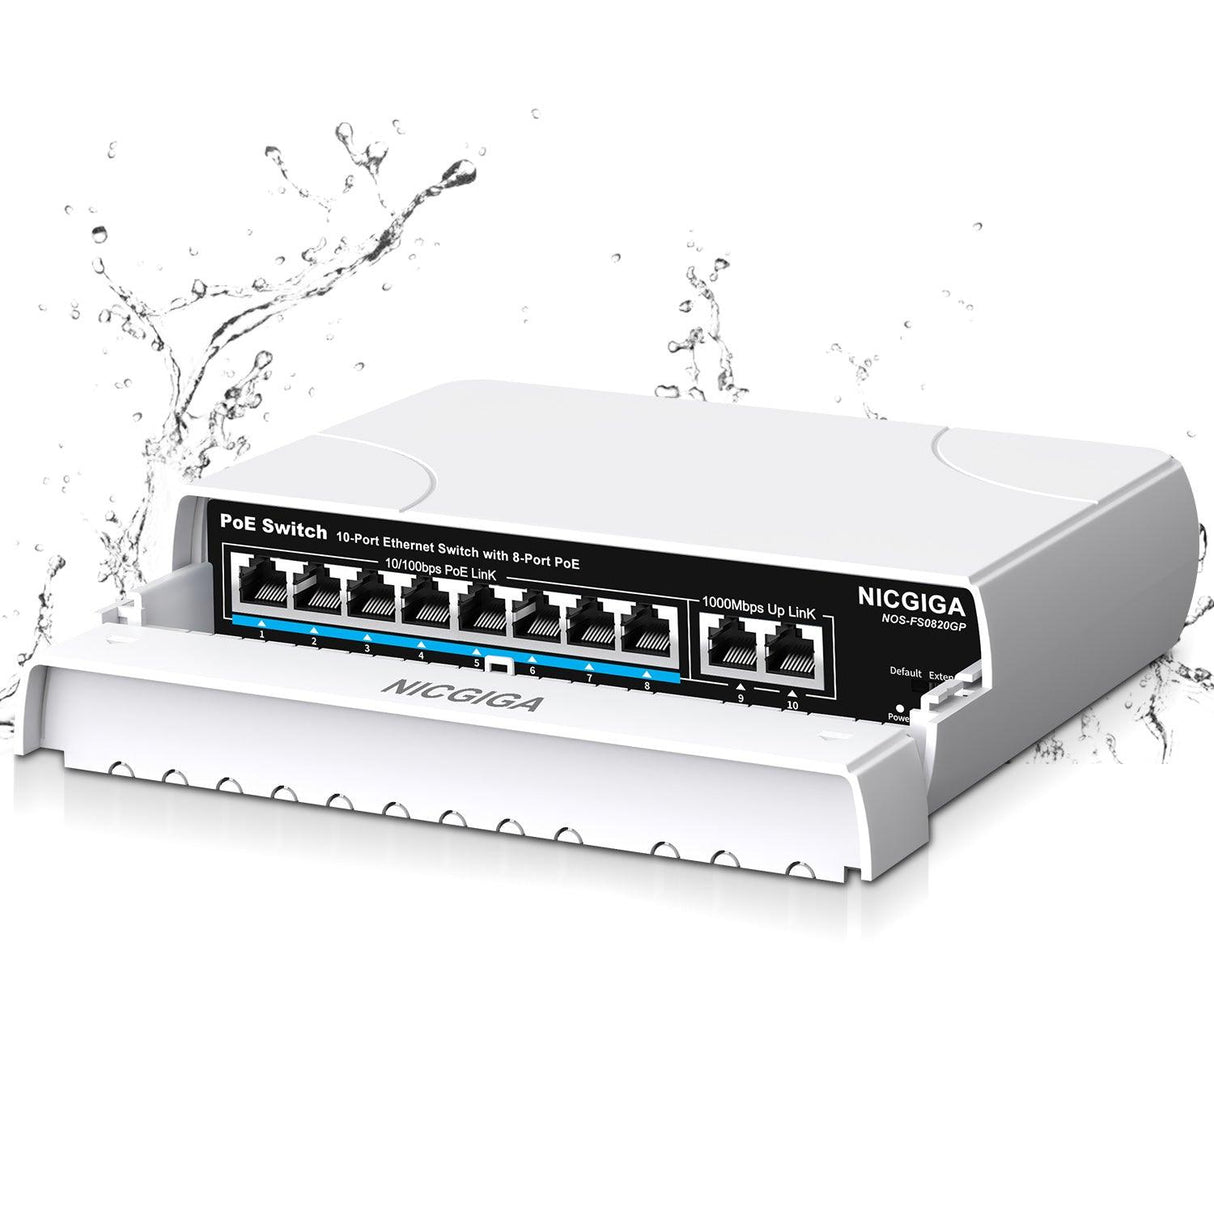 Outdoor Waterproof 8-Port PoE Switch with 8 Port PoE+@120W + Gigabit Uplink Port, 10 Port IEEE802.3af/at Power Over Ethernet Switch Unmanaged with VLAN and 250m Extender Function, Plug & Play